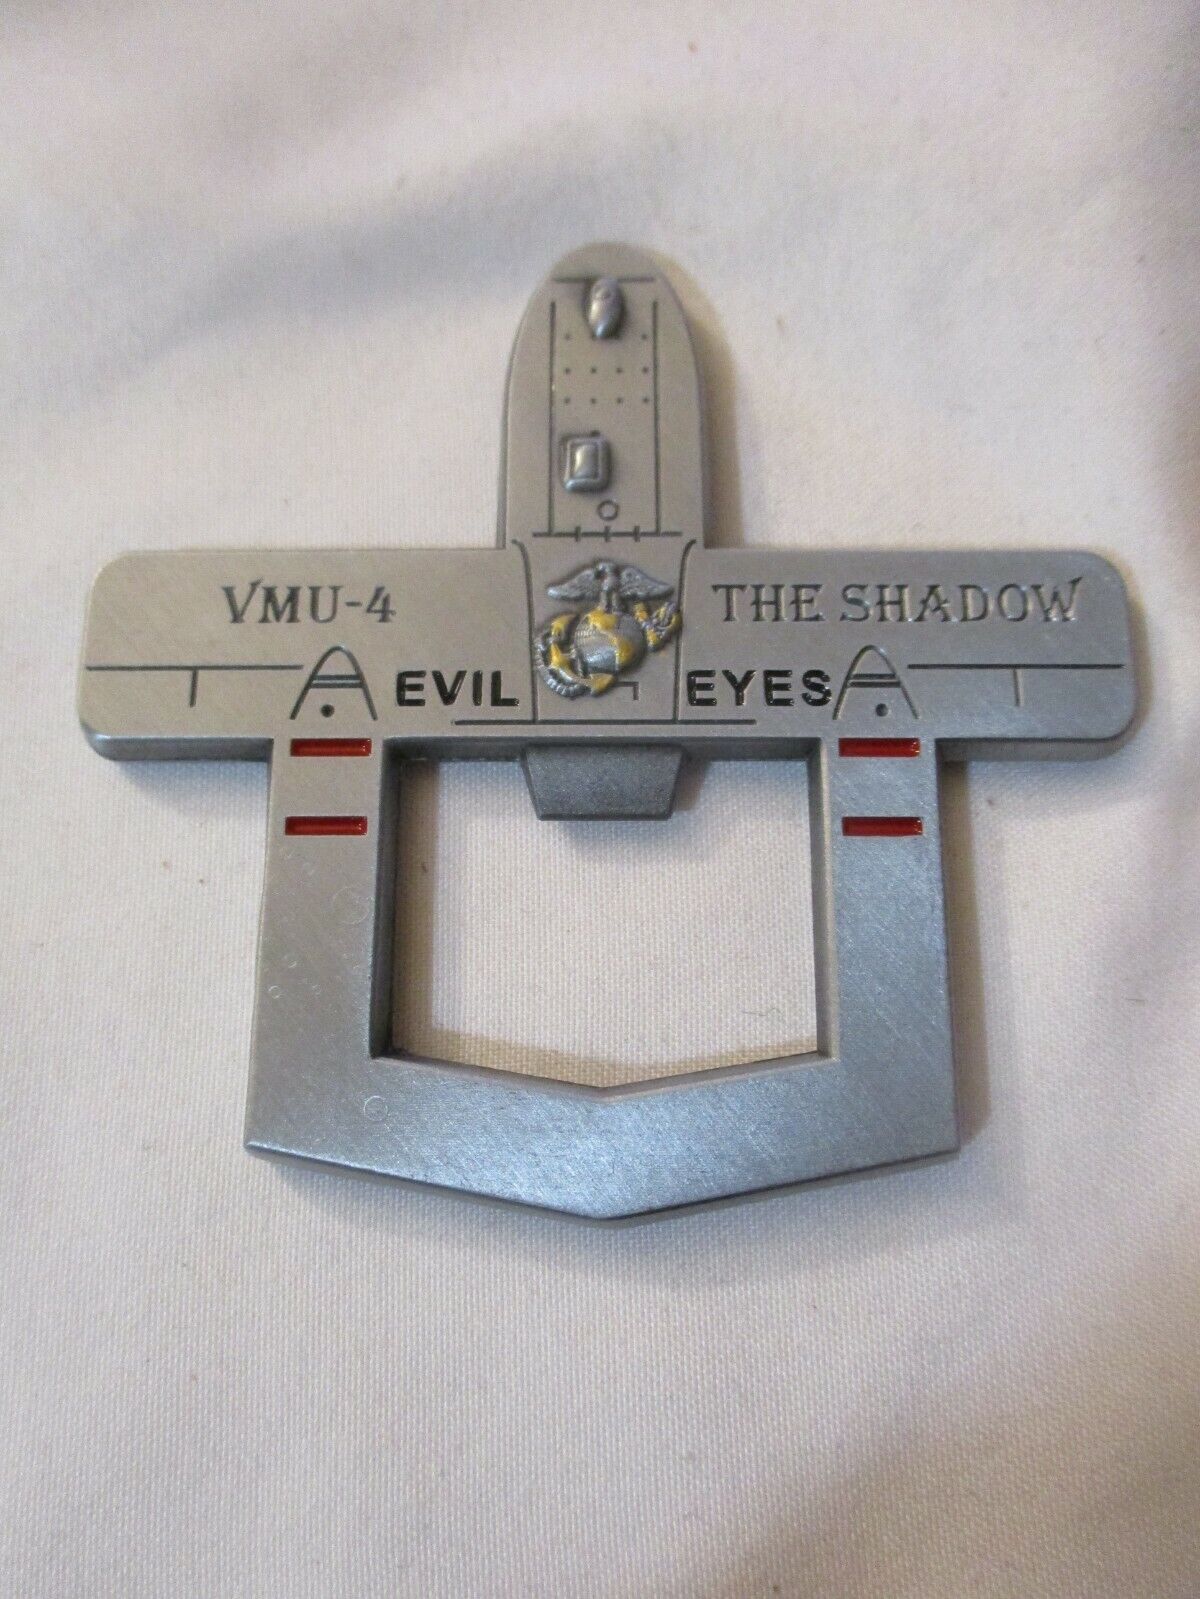 Marine Corps VMU-4 Unmanned Aerial Vehicle The Shadow Evil Eyes Challenge Coin